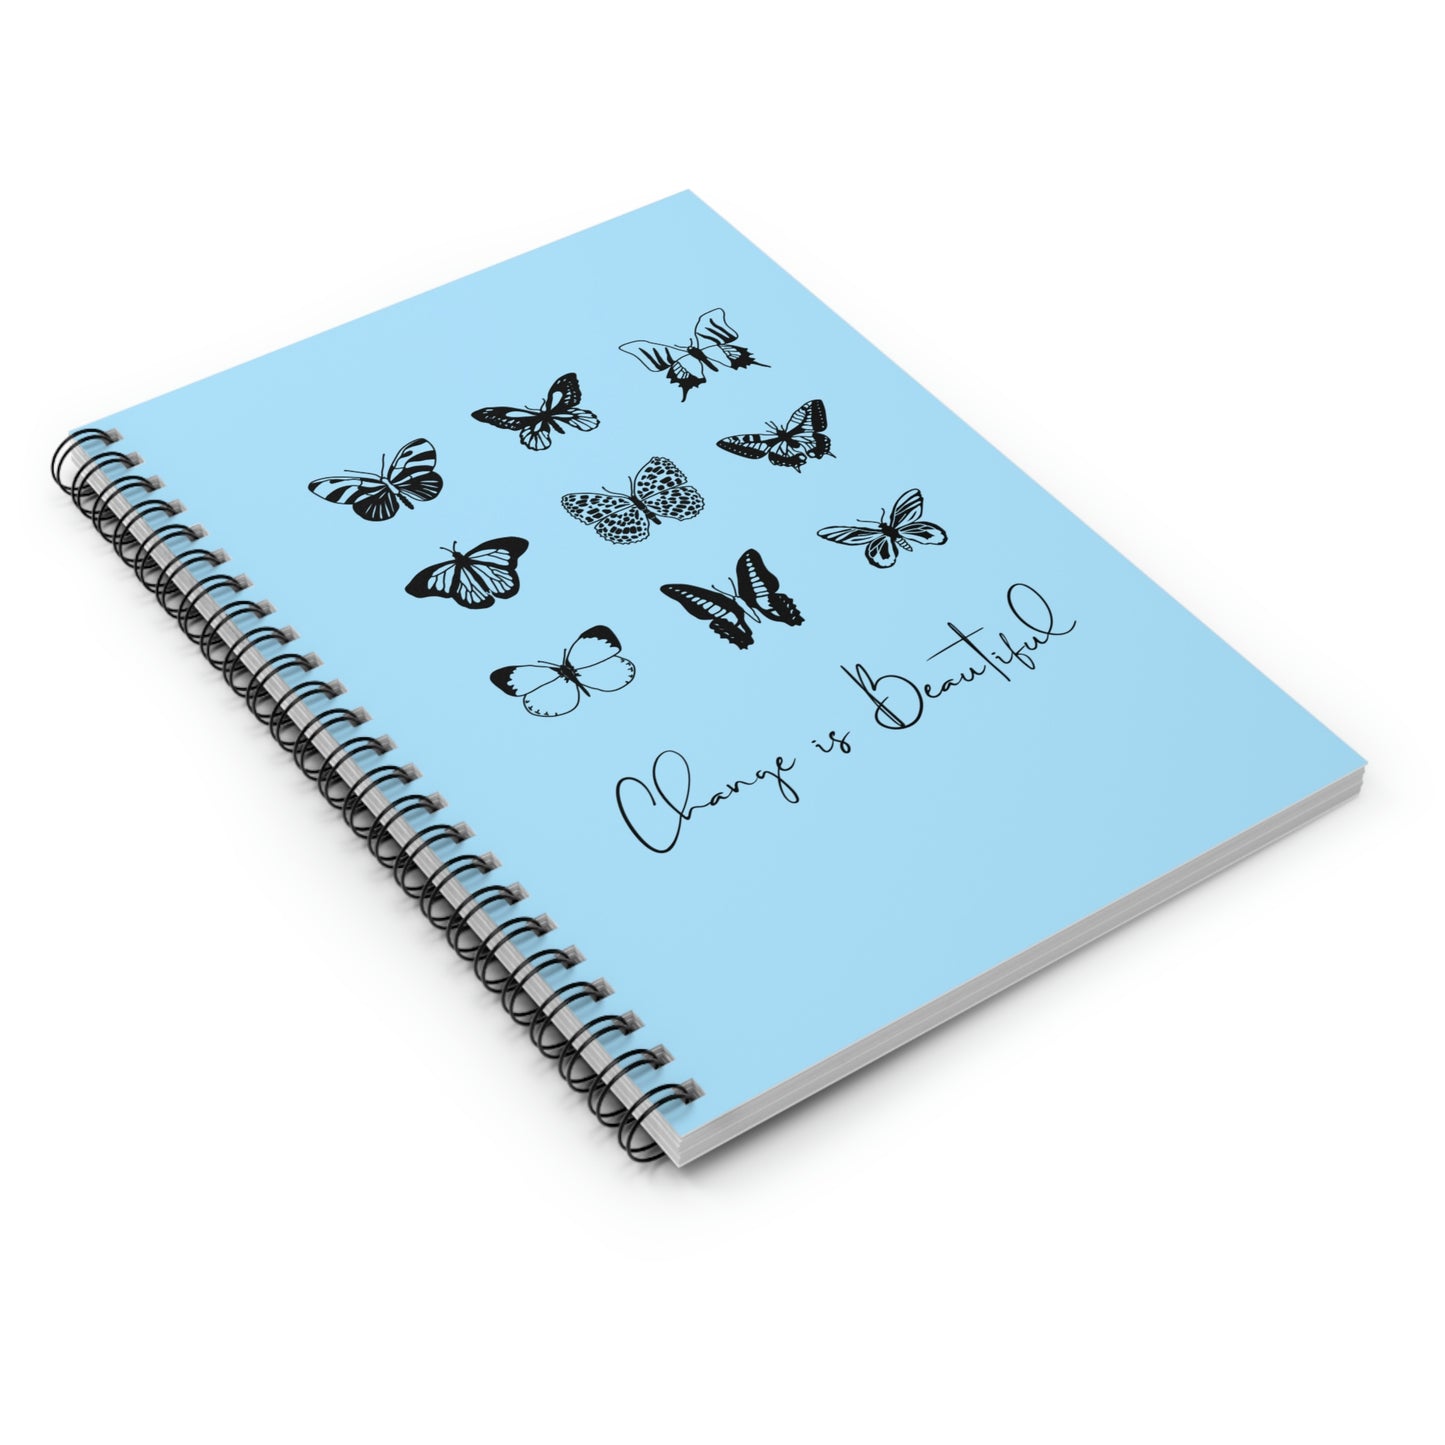 Change is Beautiful Butterfly Spiral Notebook - Ruled Line